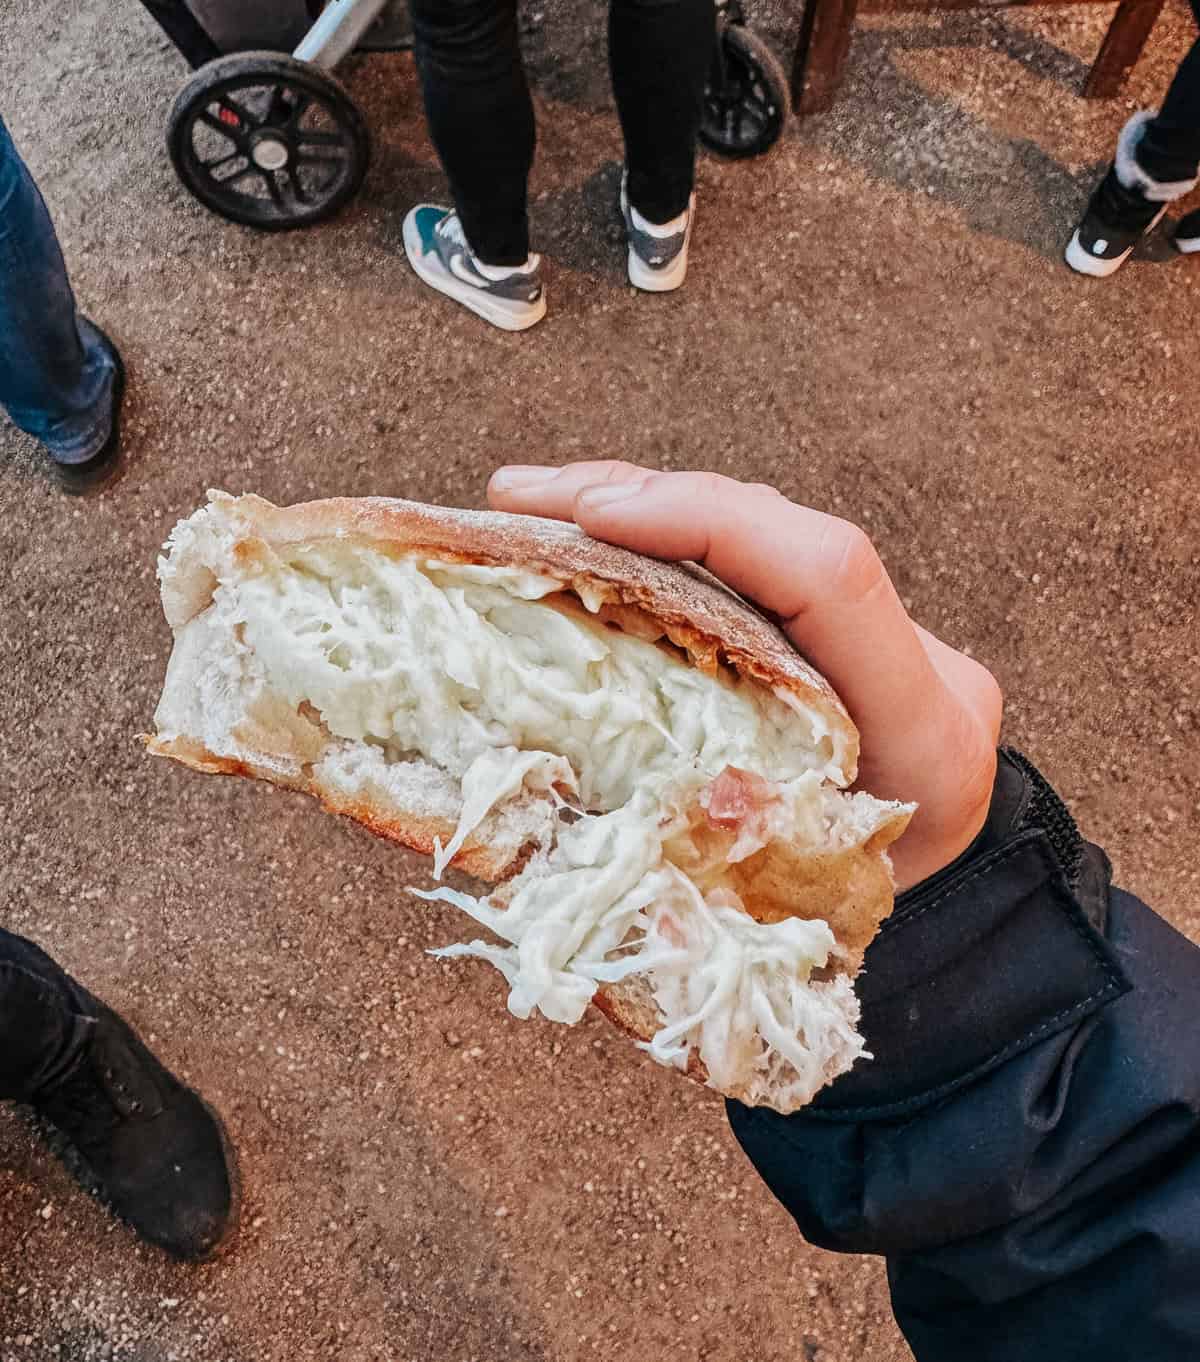 A hand holding a Handbrot, a German street food consisting of bread filled with cheese and ham, showcasing the gooey cheese stretching with each bite.